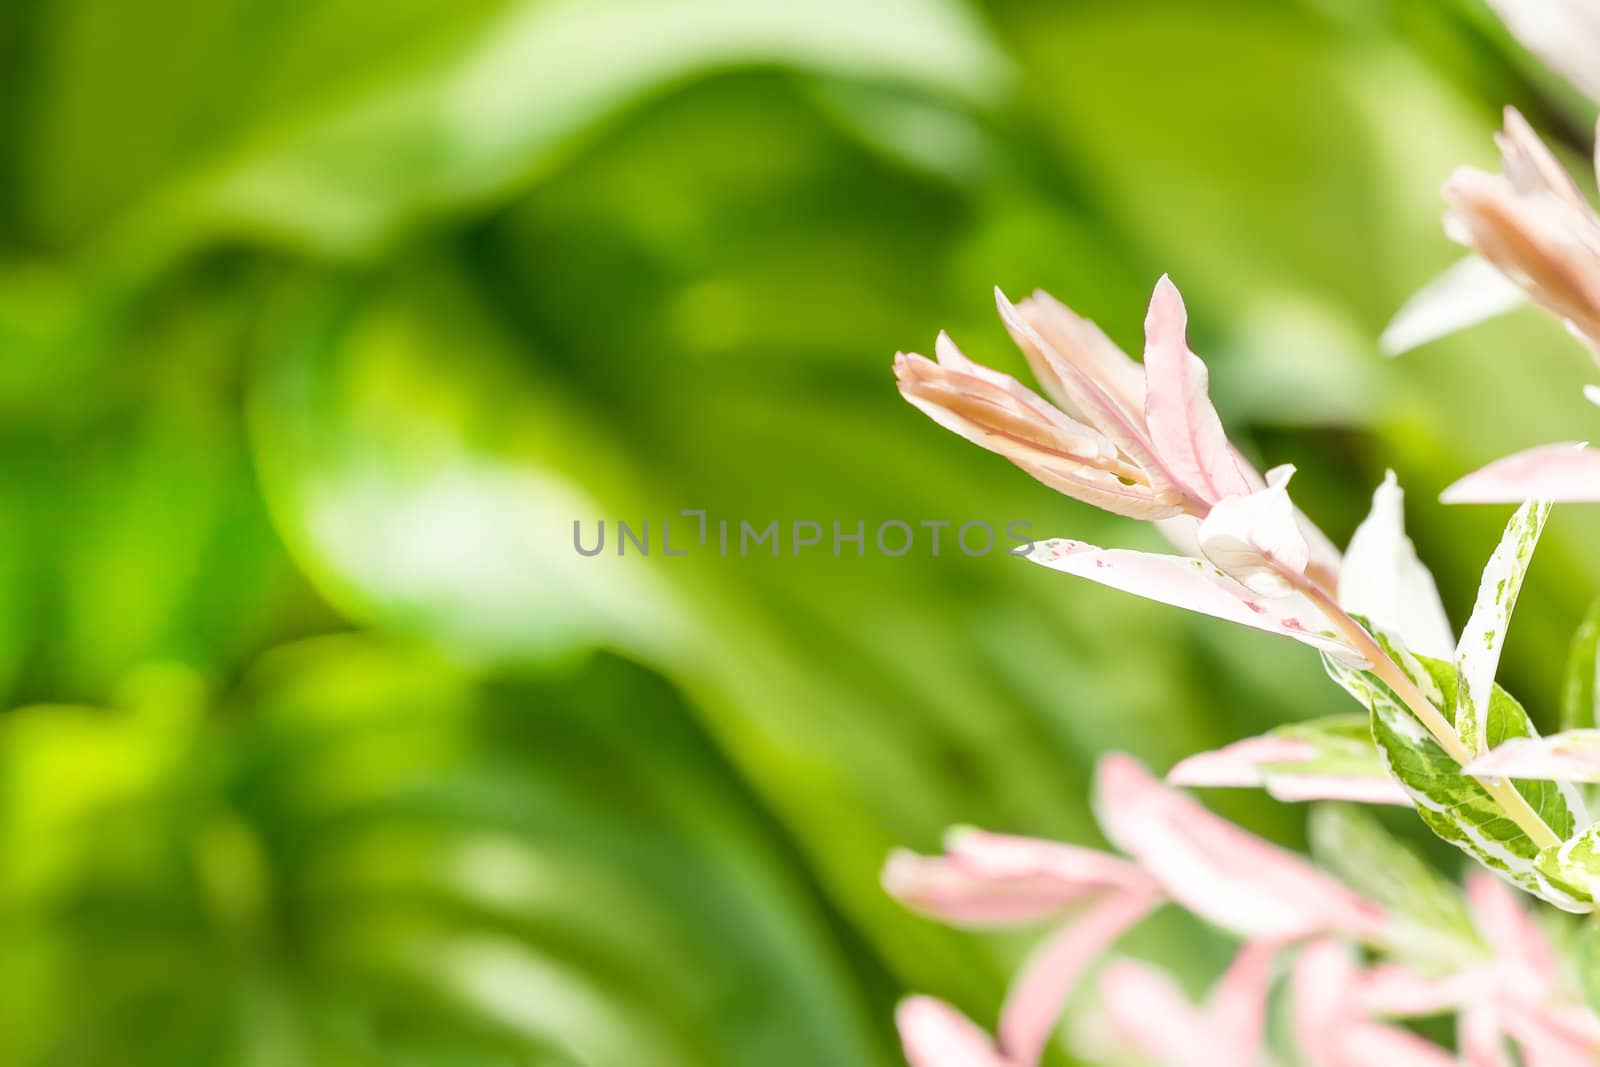 Summer background with blurred background and plant in front